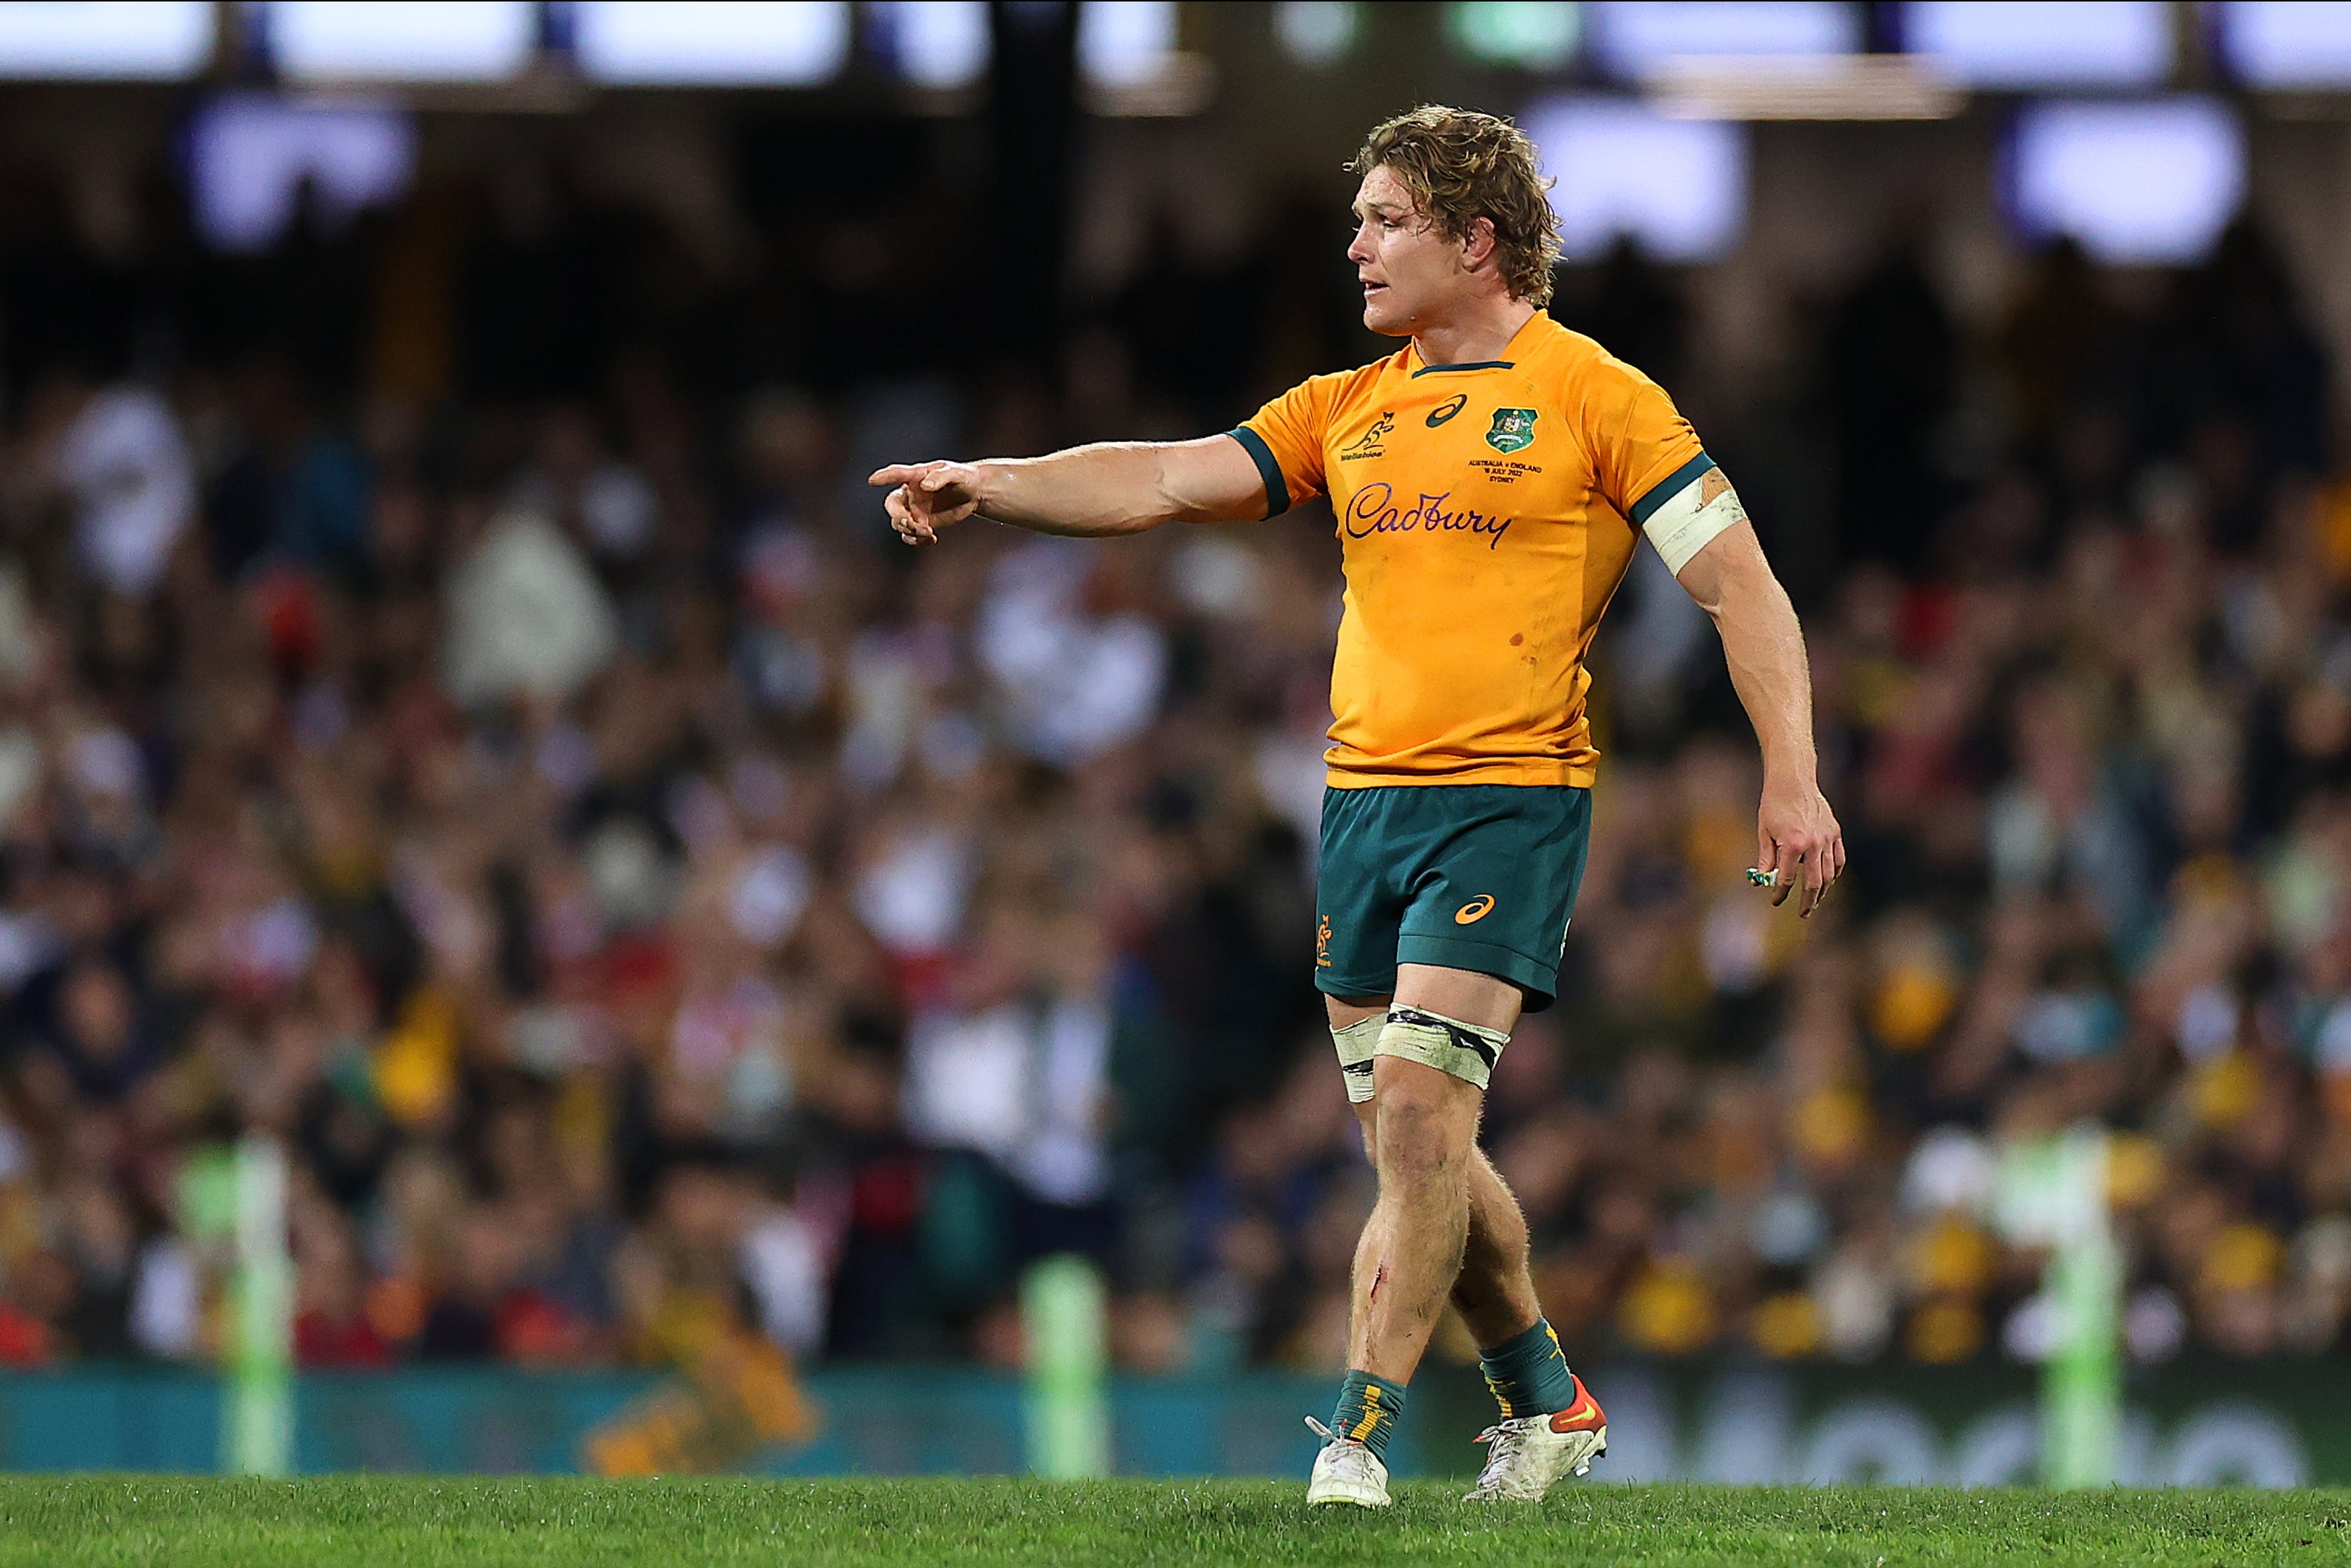 Michael Hooper made his debut for Australia Sevens at the SVNS event in Hong Kong